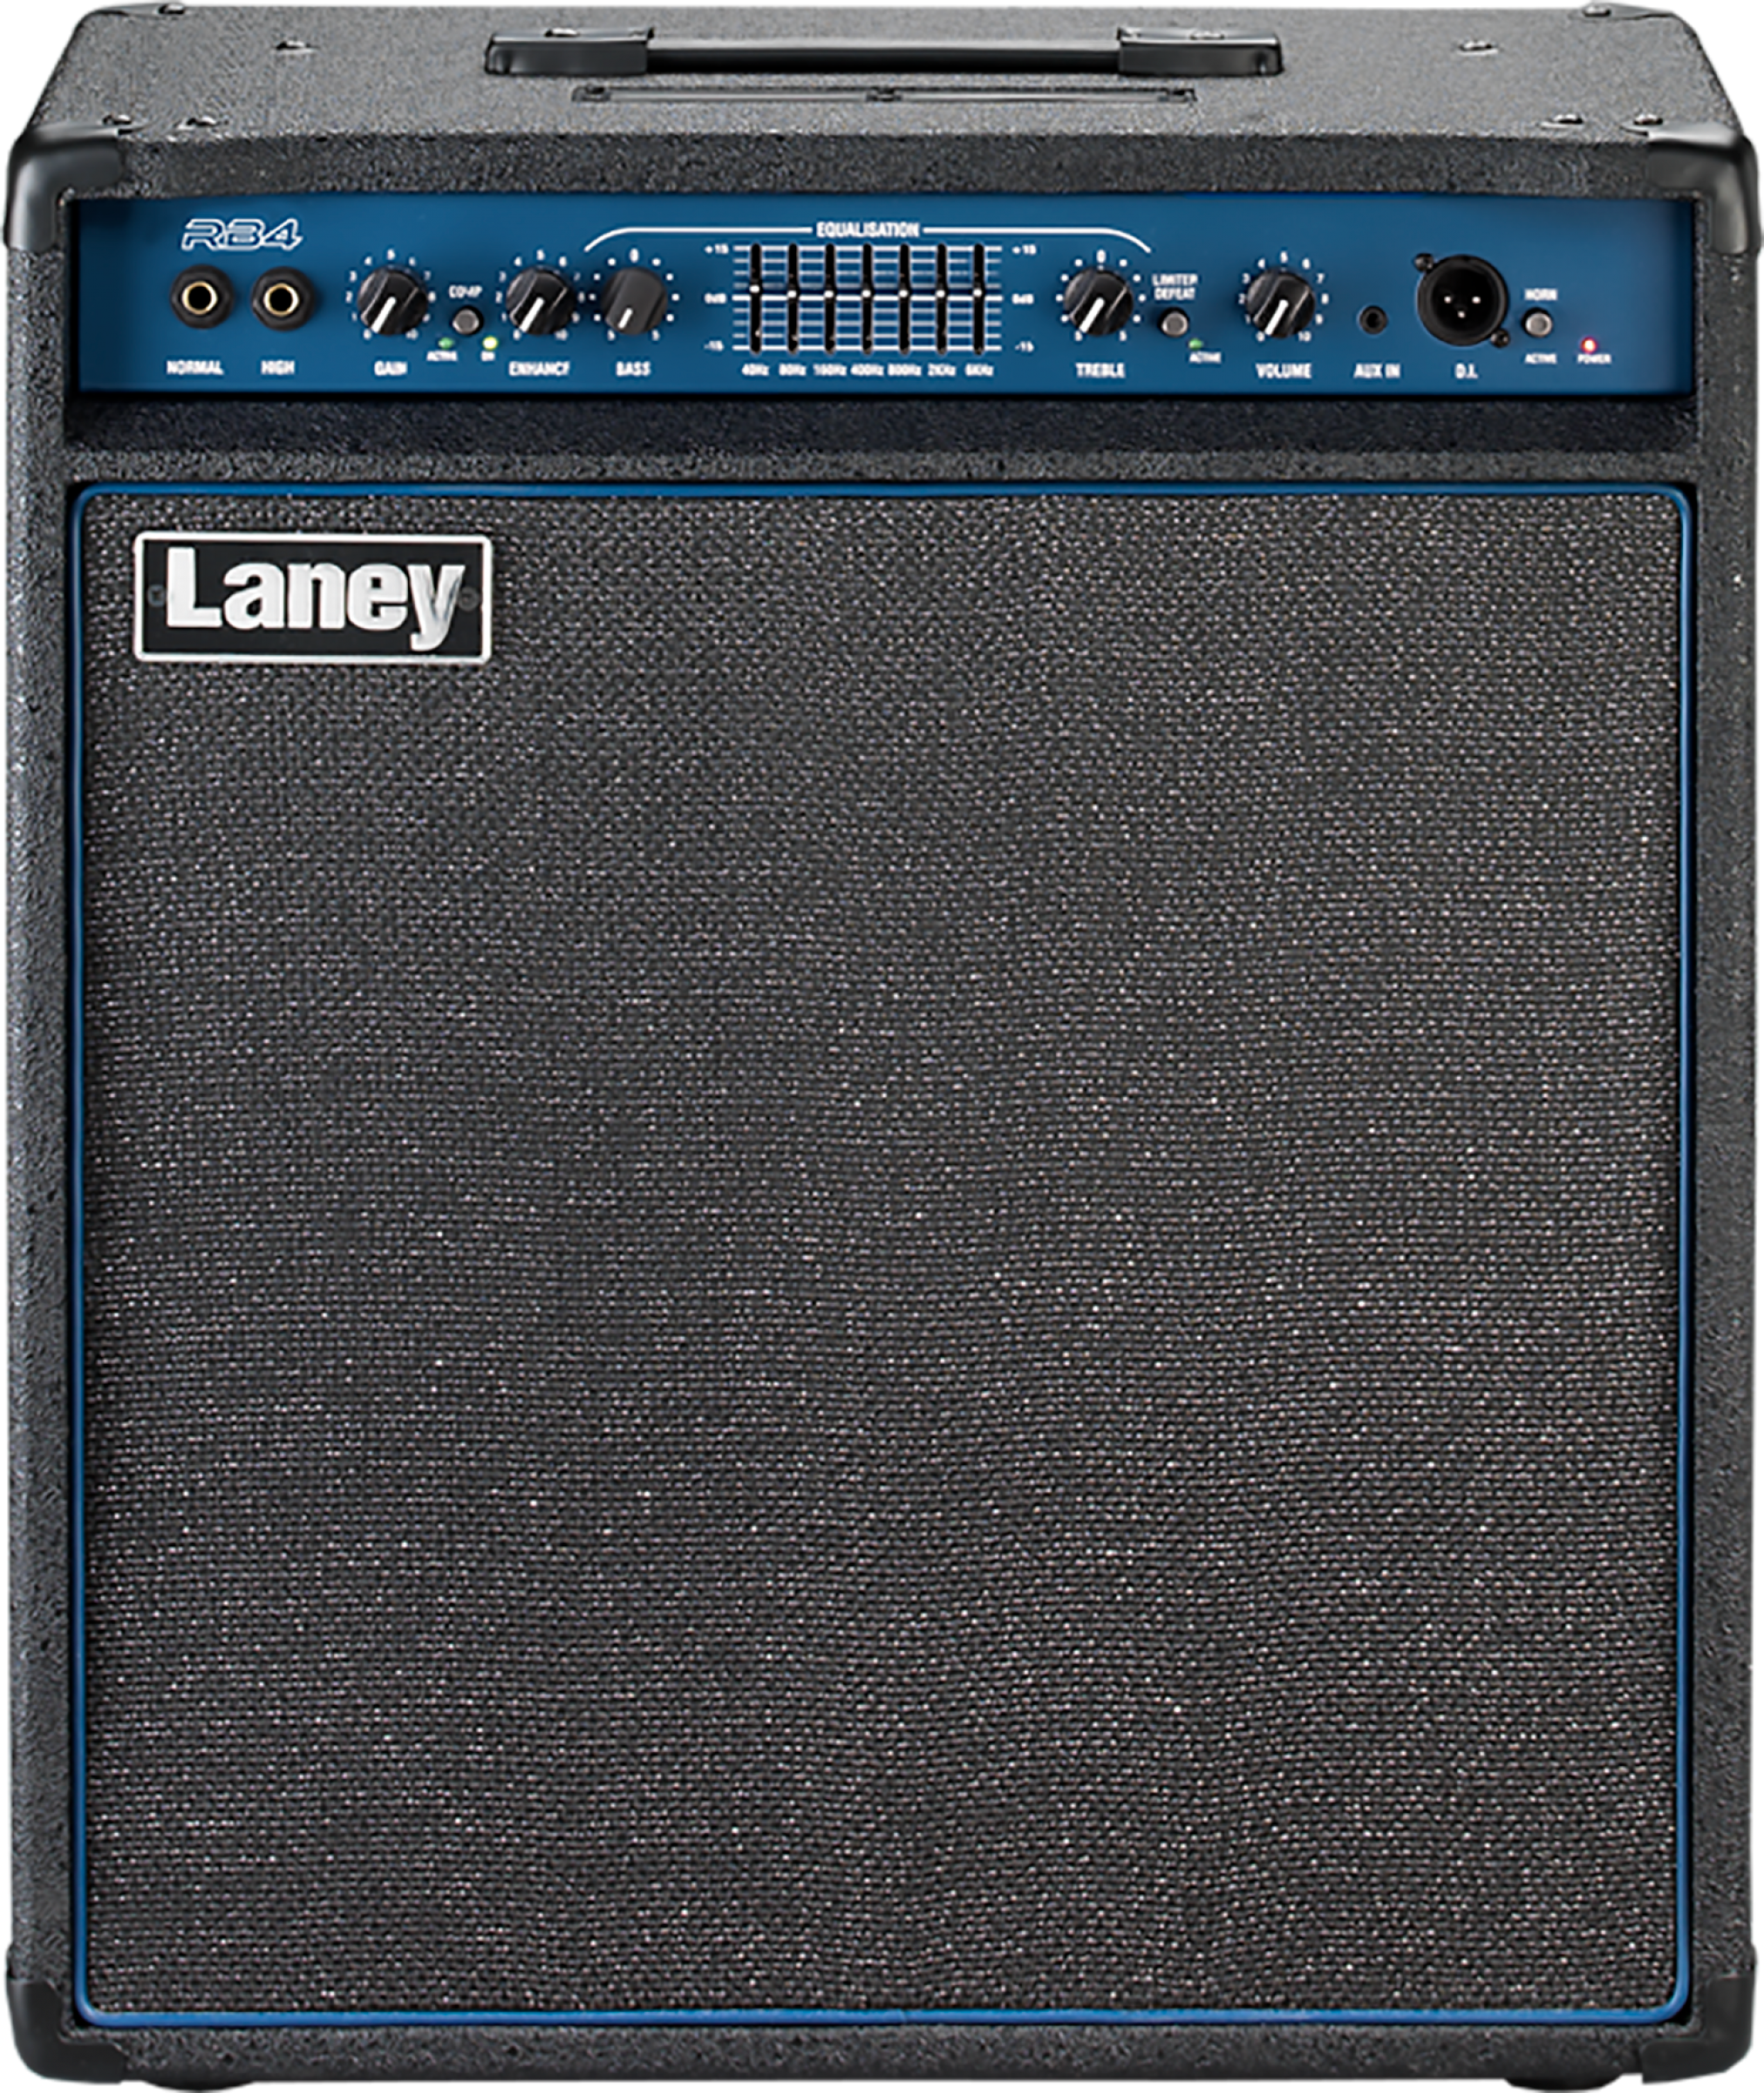 Laney Rb4 165w 1x15 - Bass combo amp - Main picture